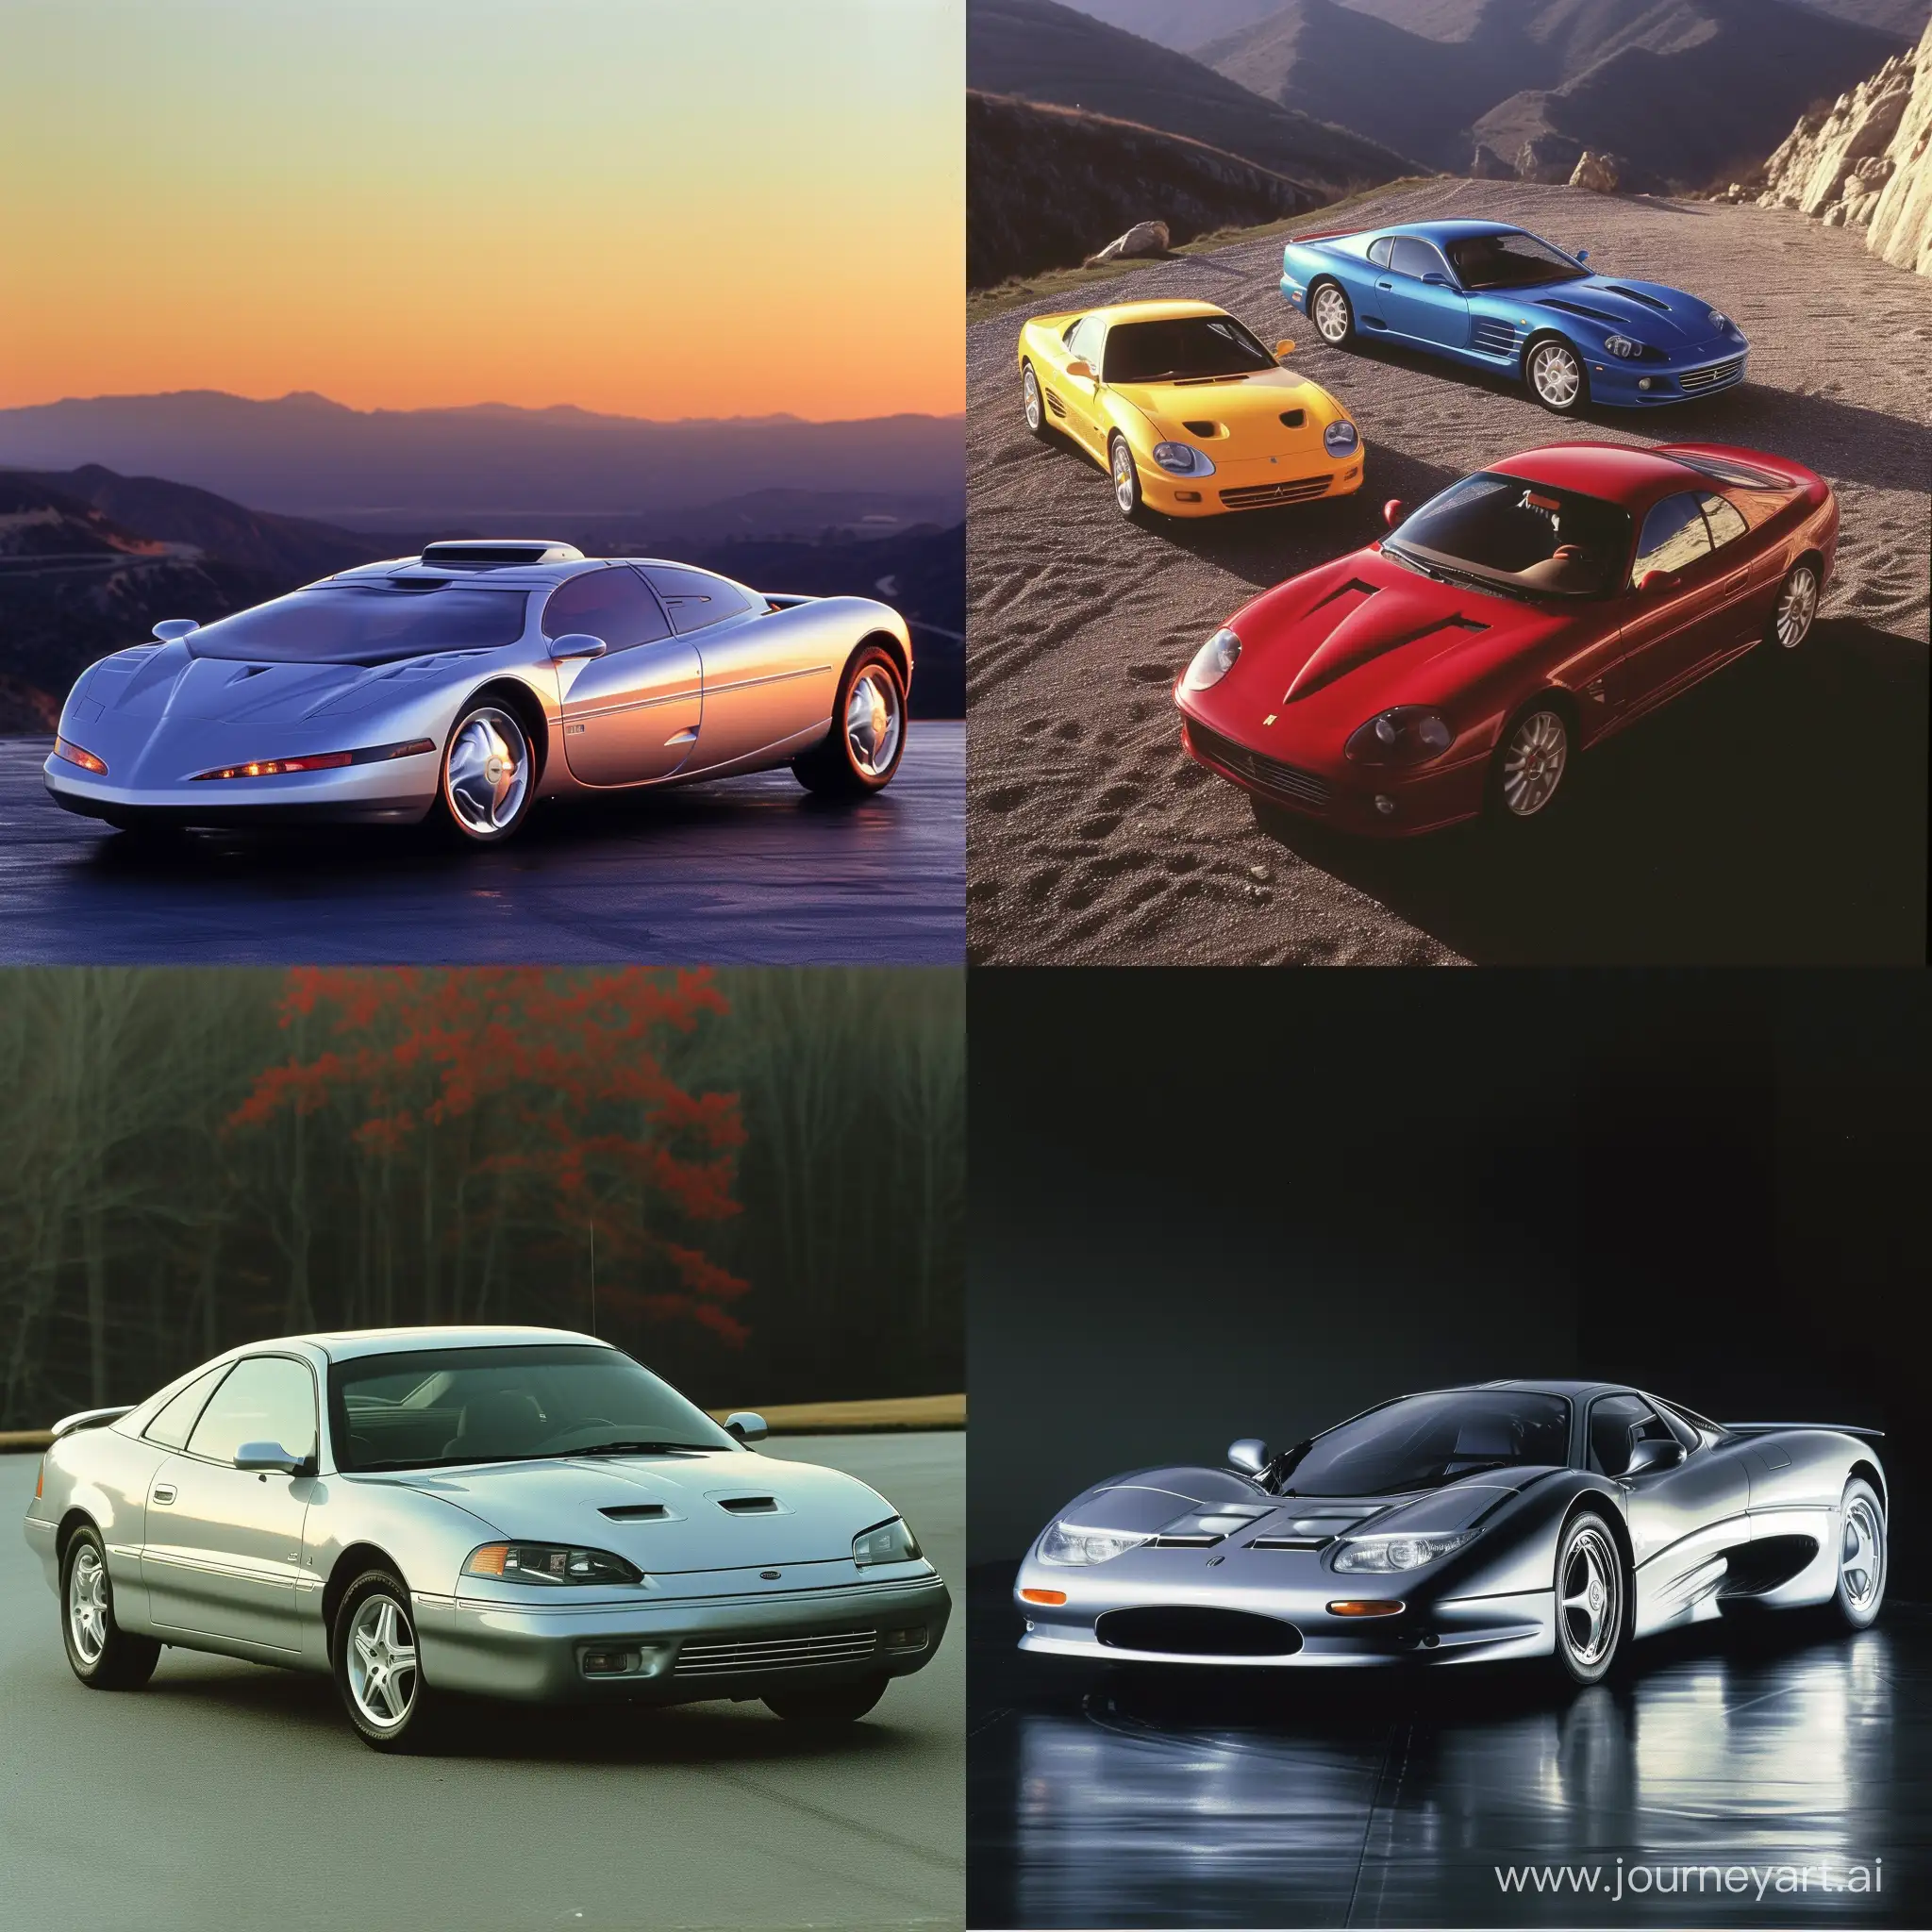 Classic-Cars-Collection-from-1995-AD-Vintage-Automotive-Photography